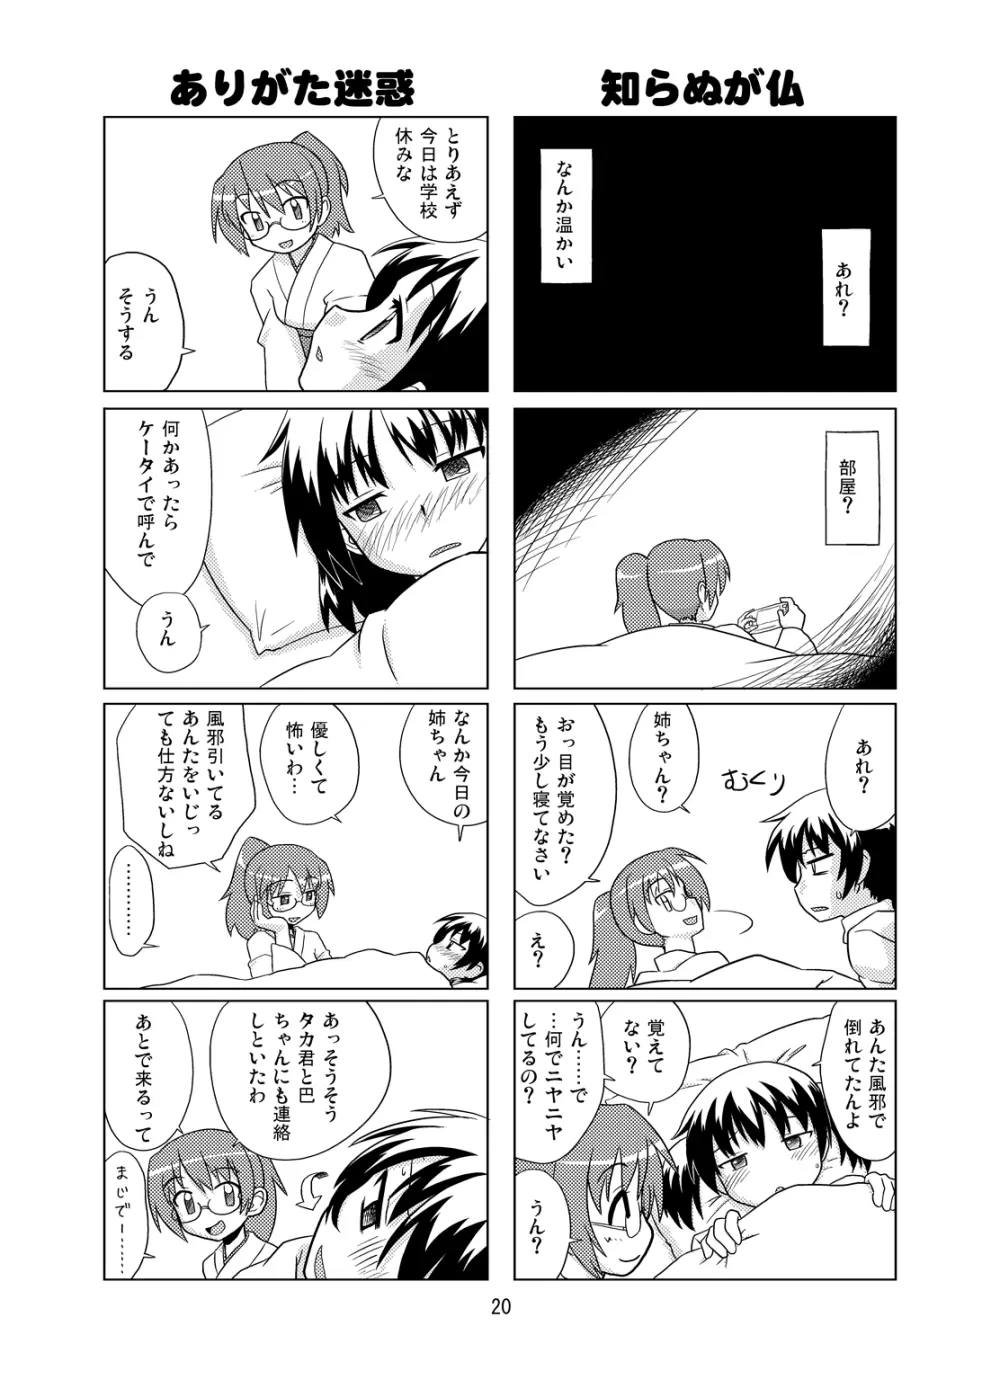 Composition Mix 8 はじマル！6 - page19